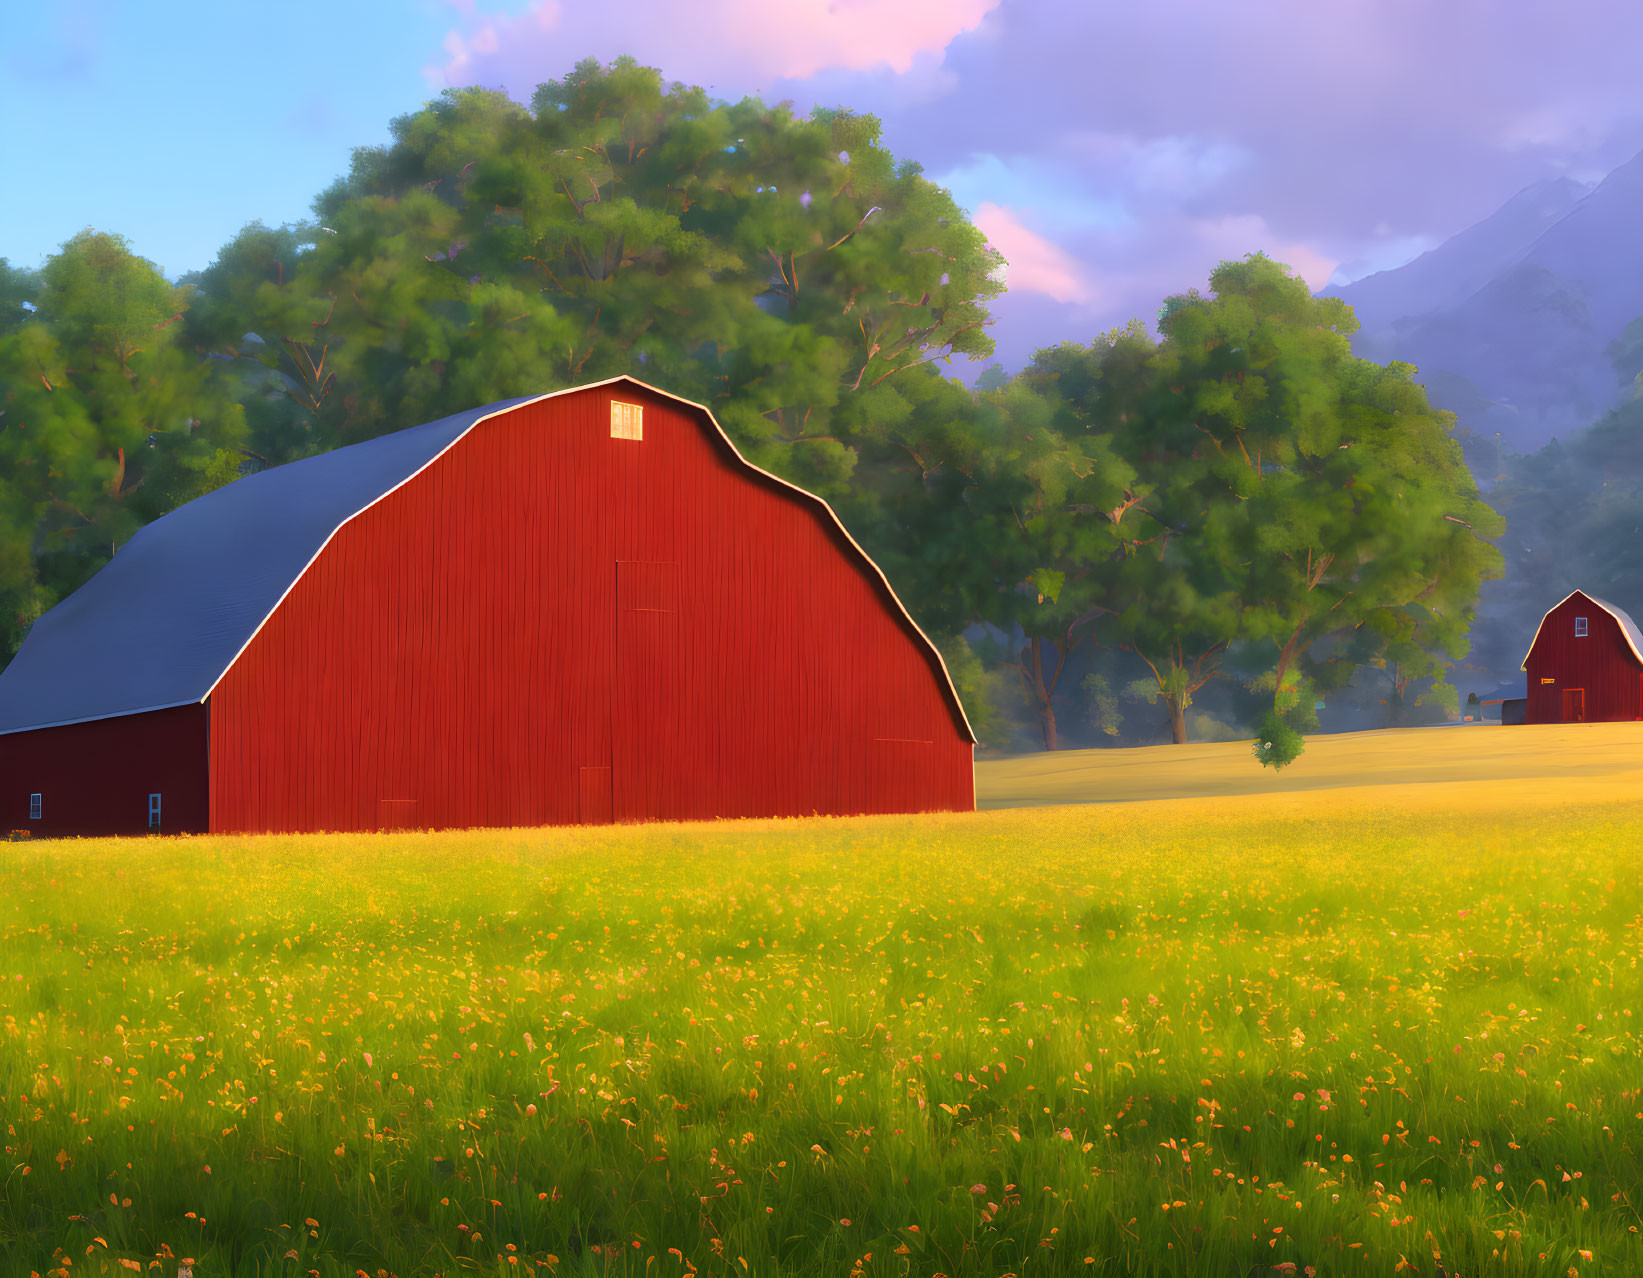 Tranquil countryside landscape with red barn in blooming field at dusk